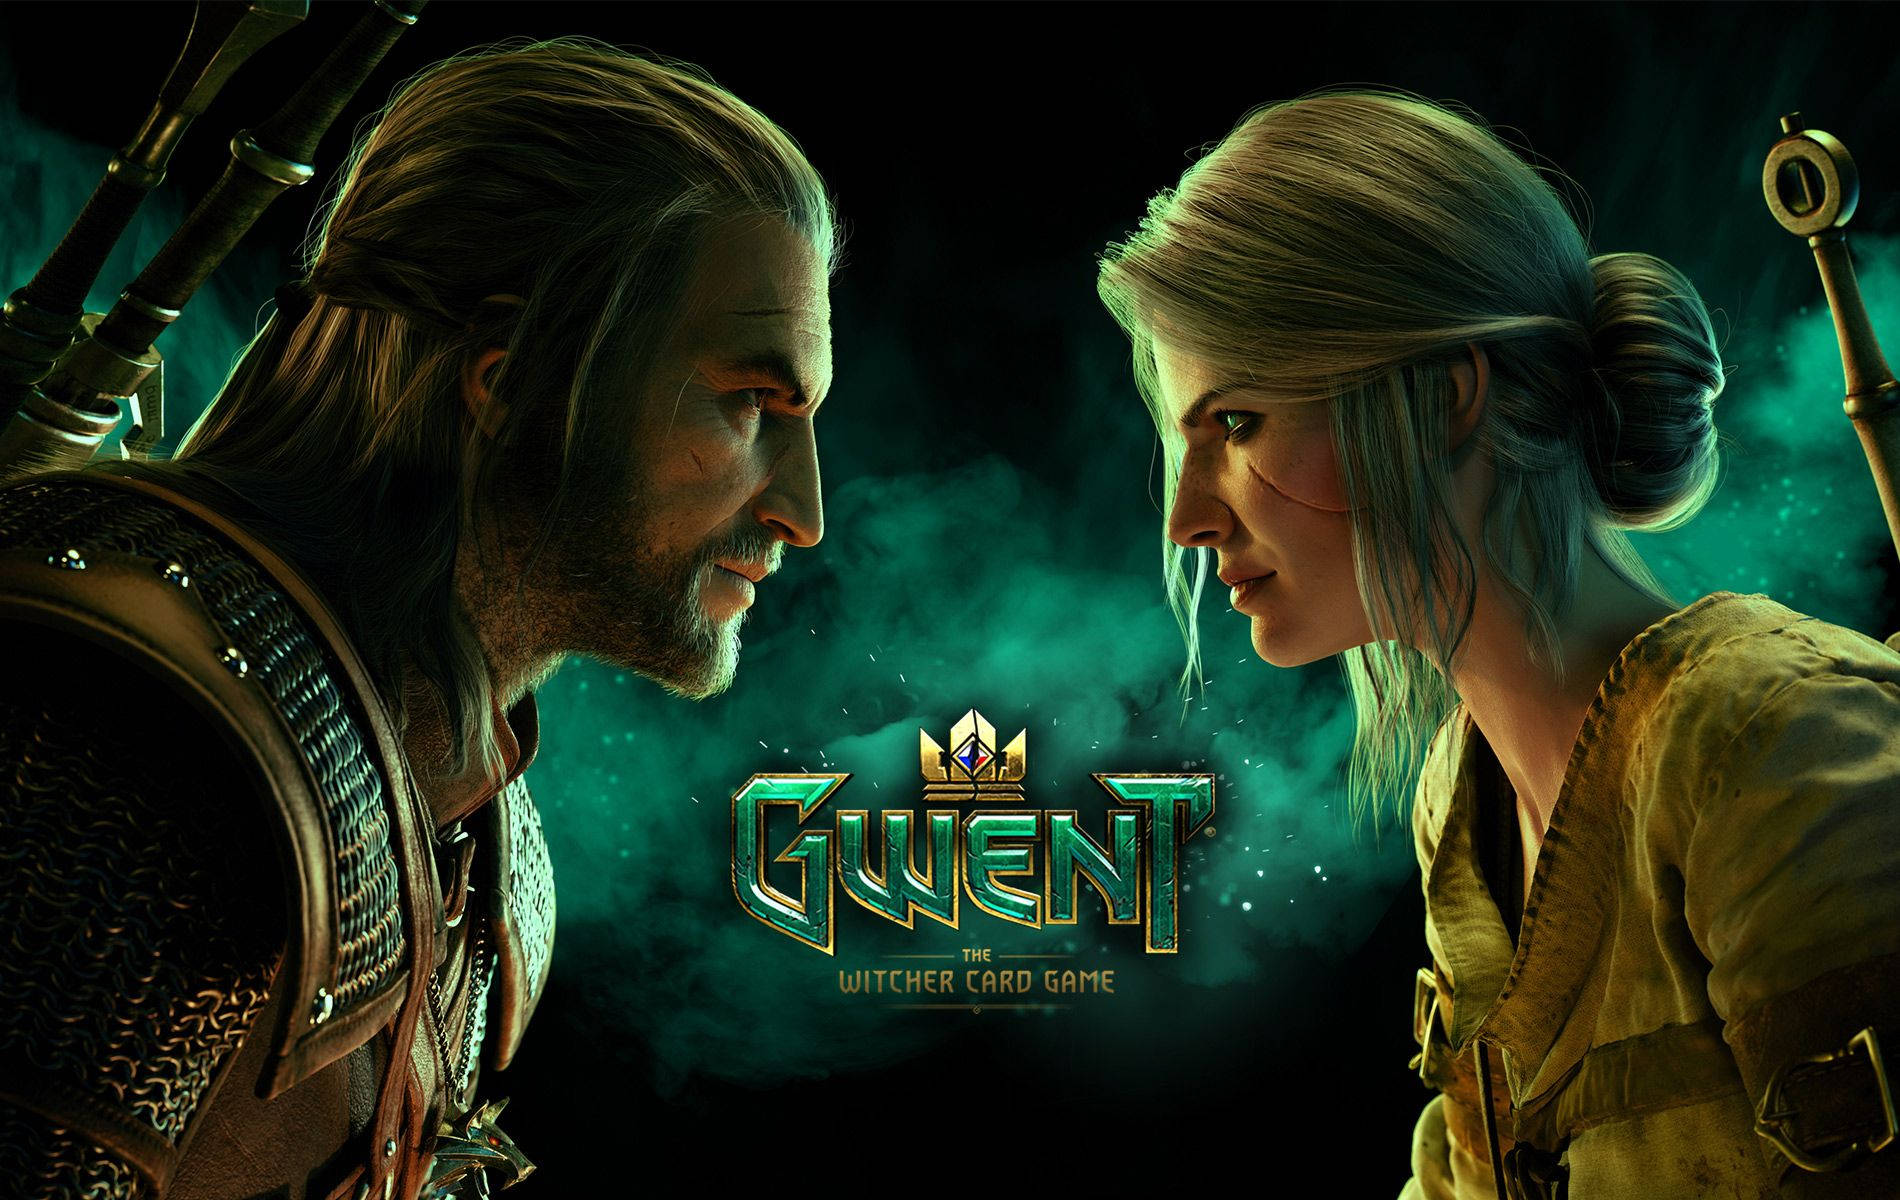 The Witcher Geralt And Ciri Poster Background